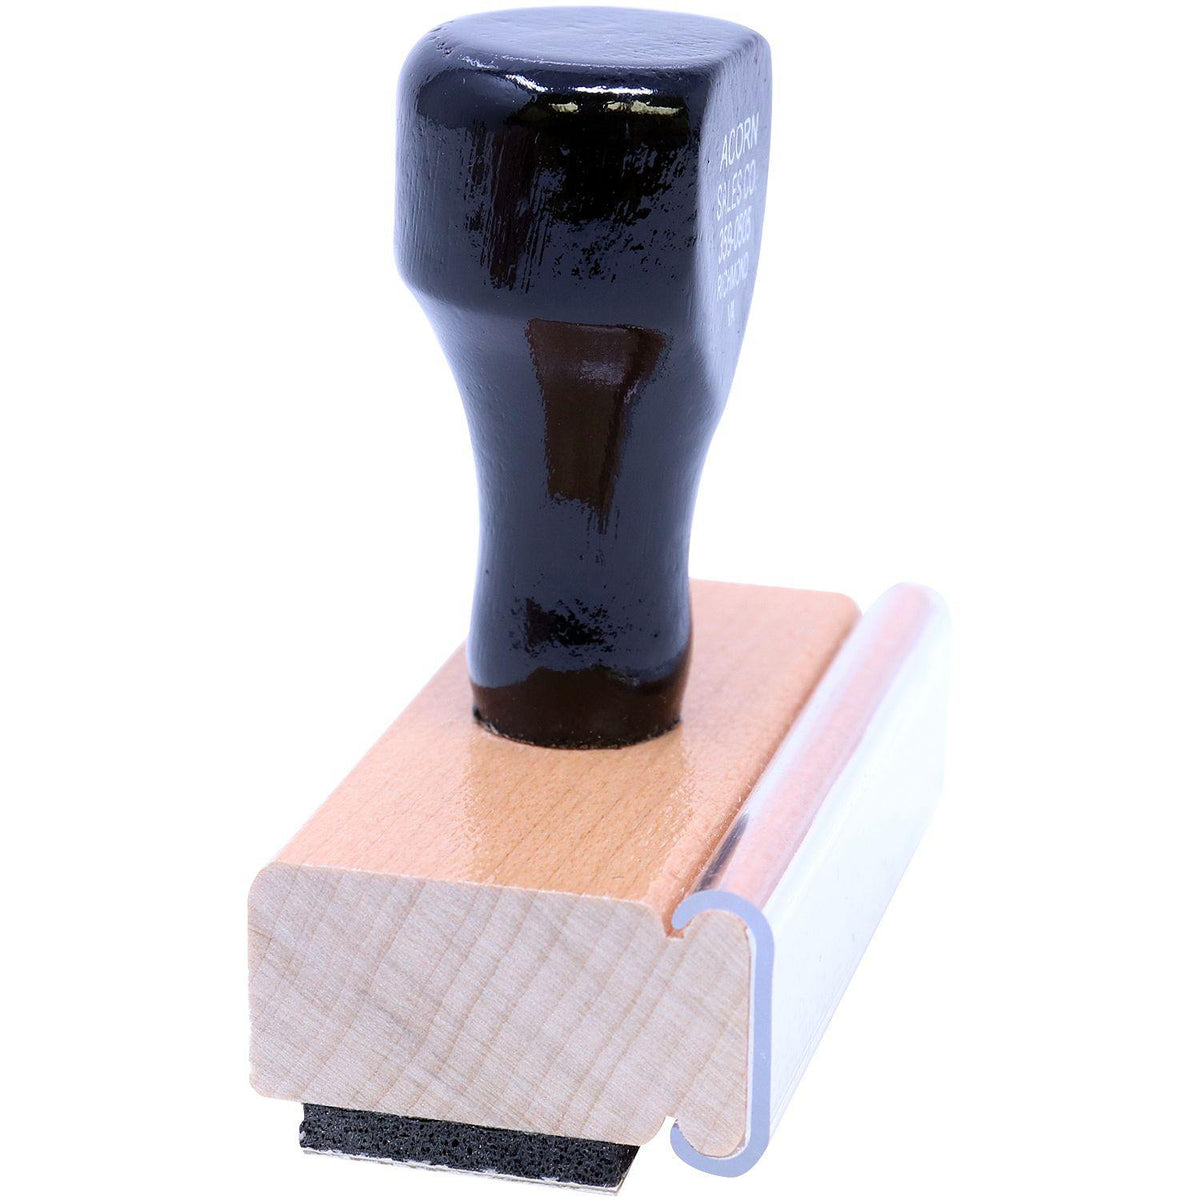 Side View of Standard Mail A Rubber Stamp at an Angle